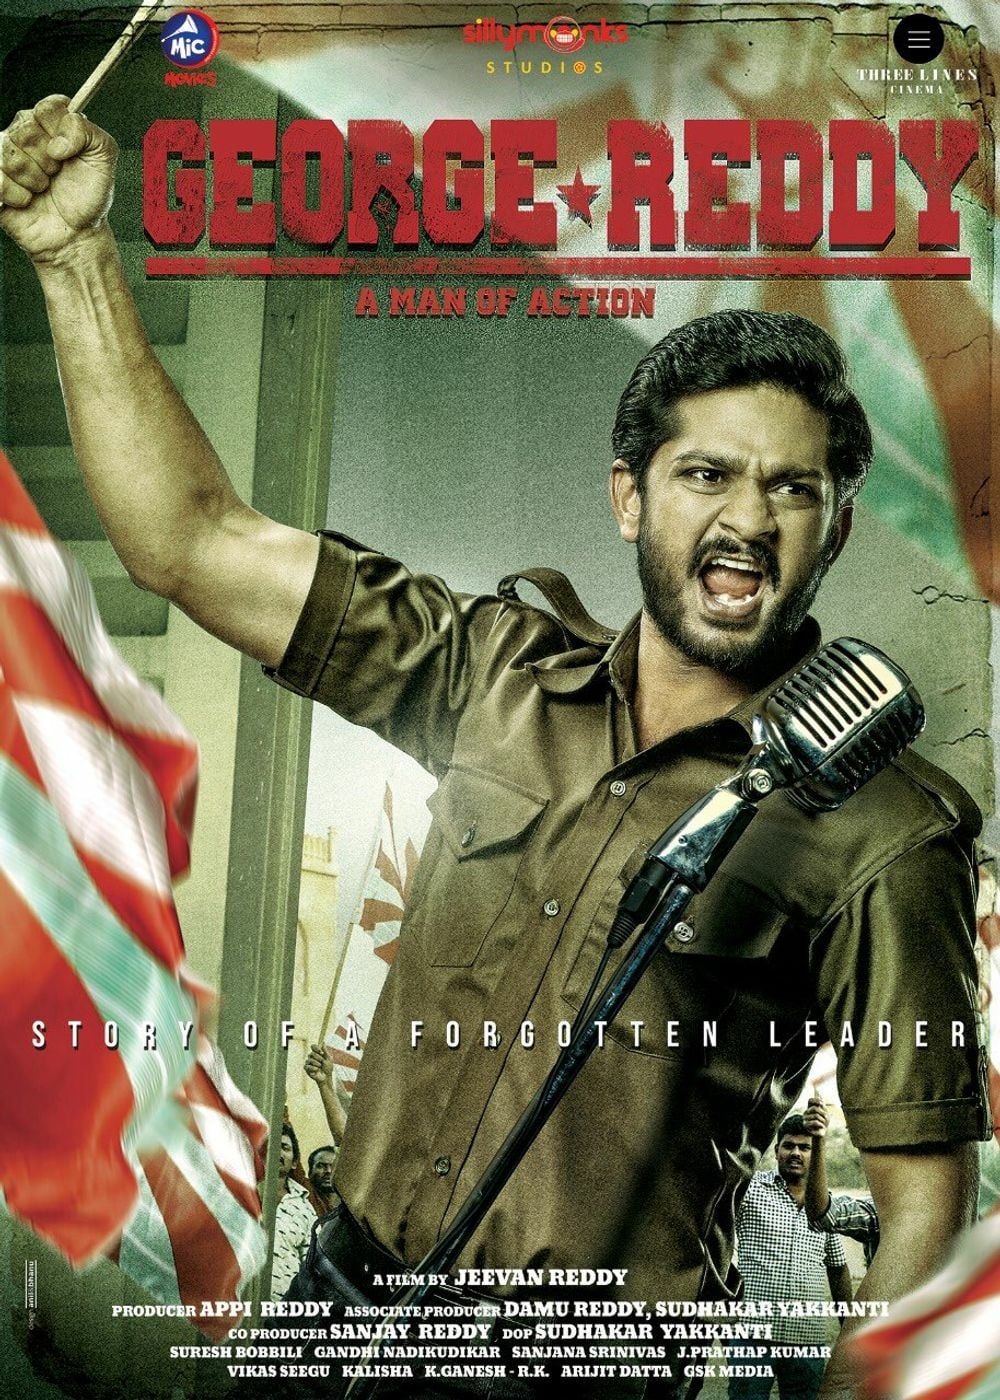 Poster for the movie "George Reddy"